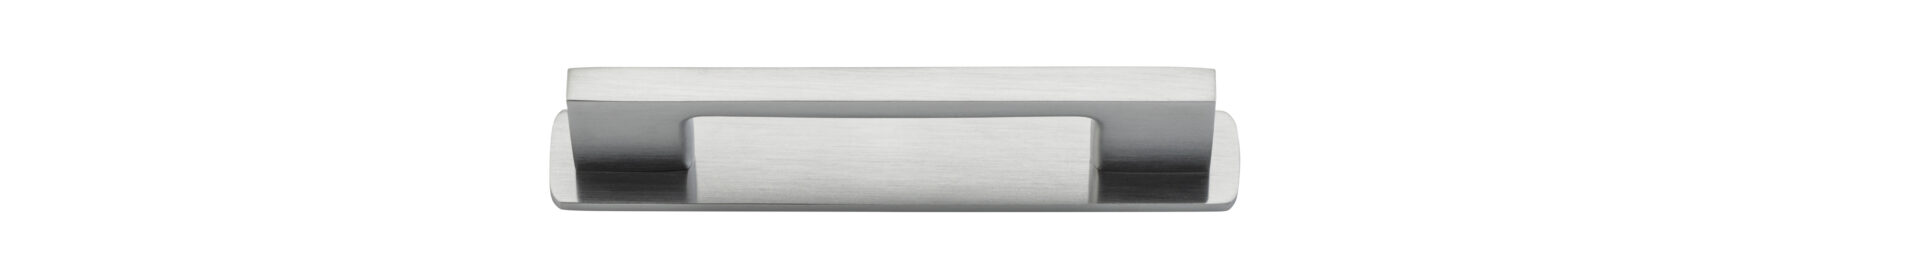 0534B - Cali Cabinet Pull with Backplate - CTC 96mm - Brushed Chrome